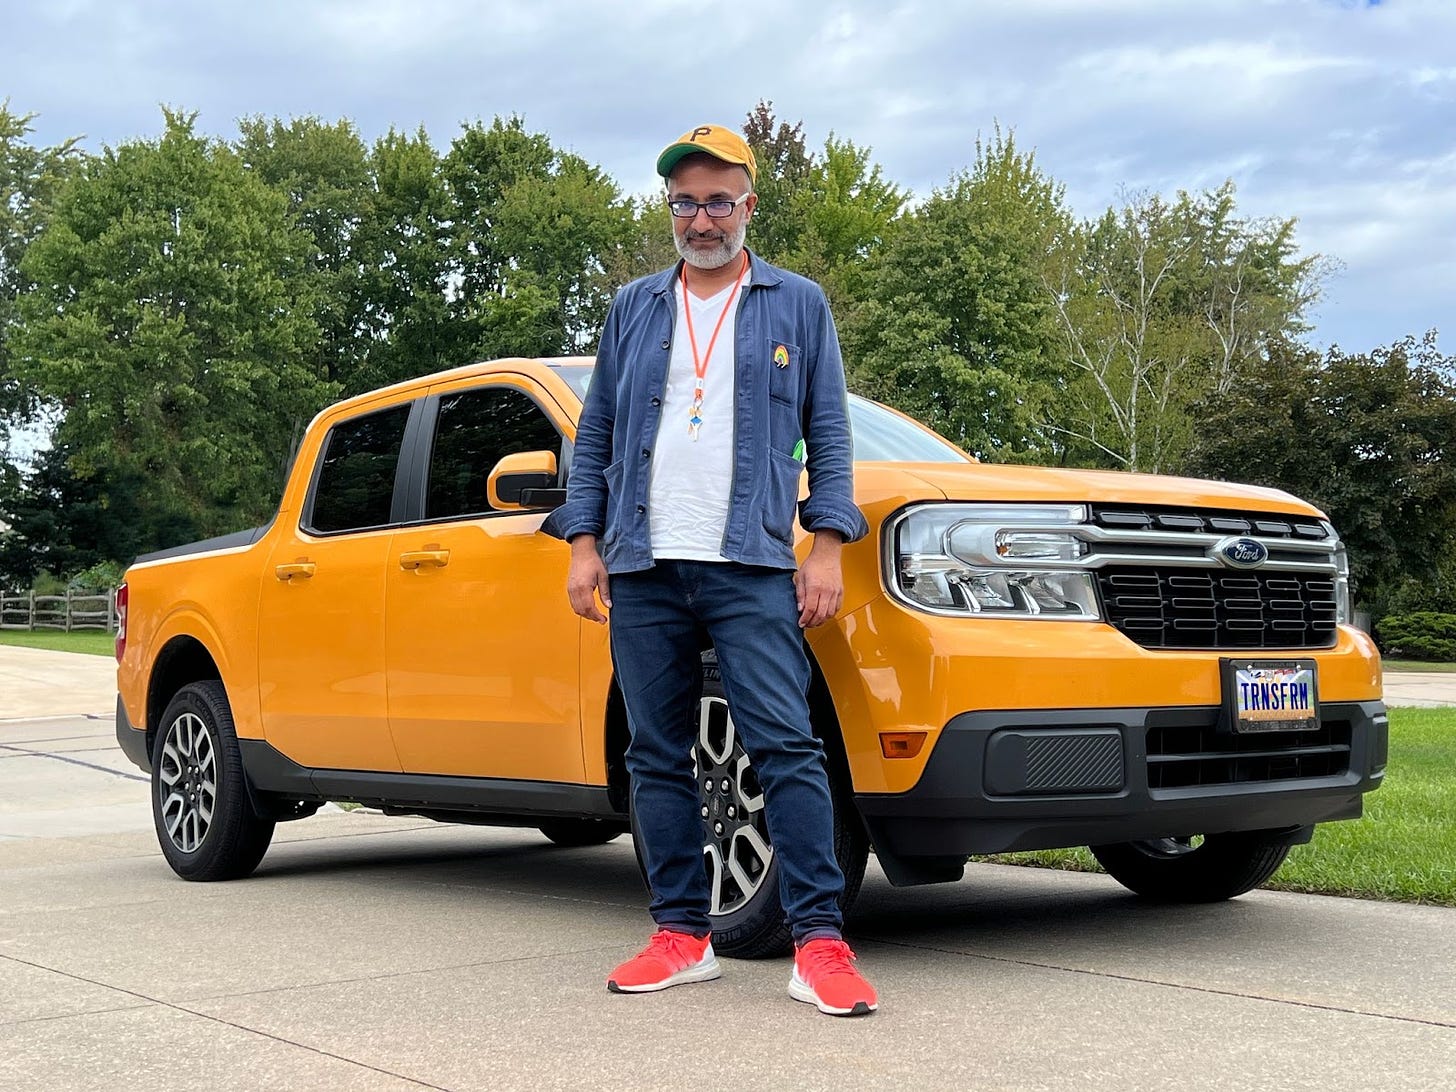 Bearded man with yellow "P" hat stands in front of a yellow hybrid pickup truck with the license plate, "TRNSFRM"